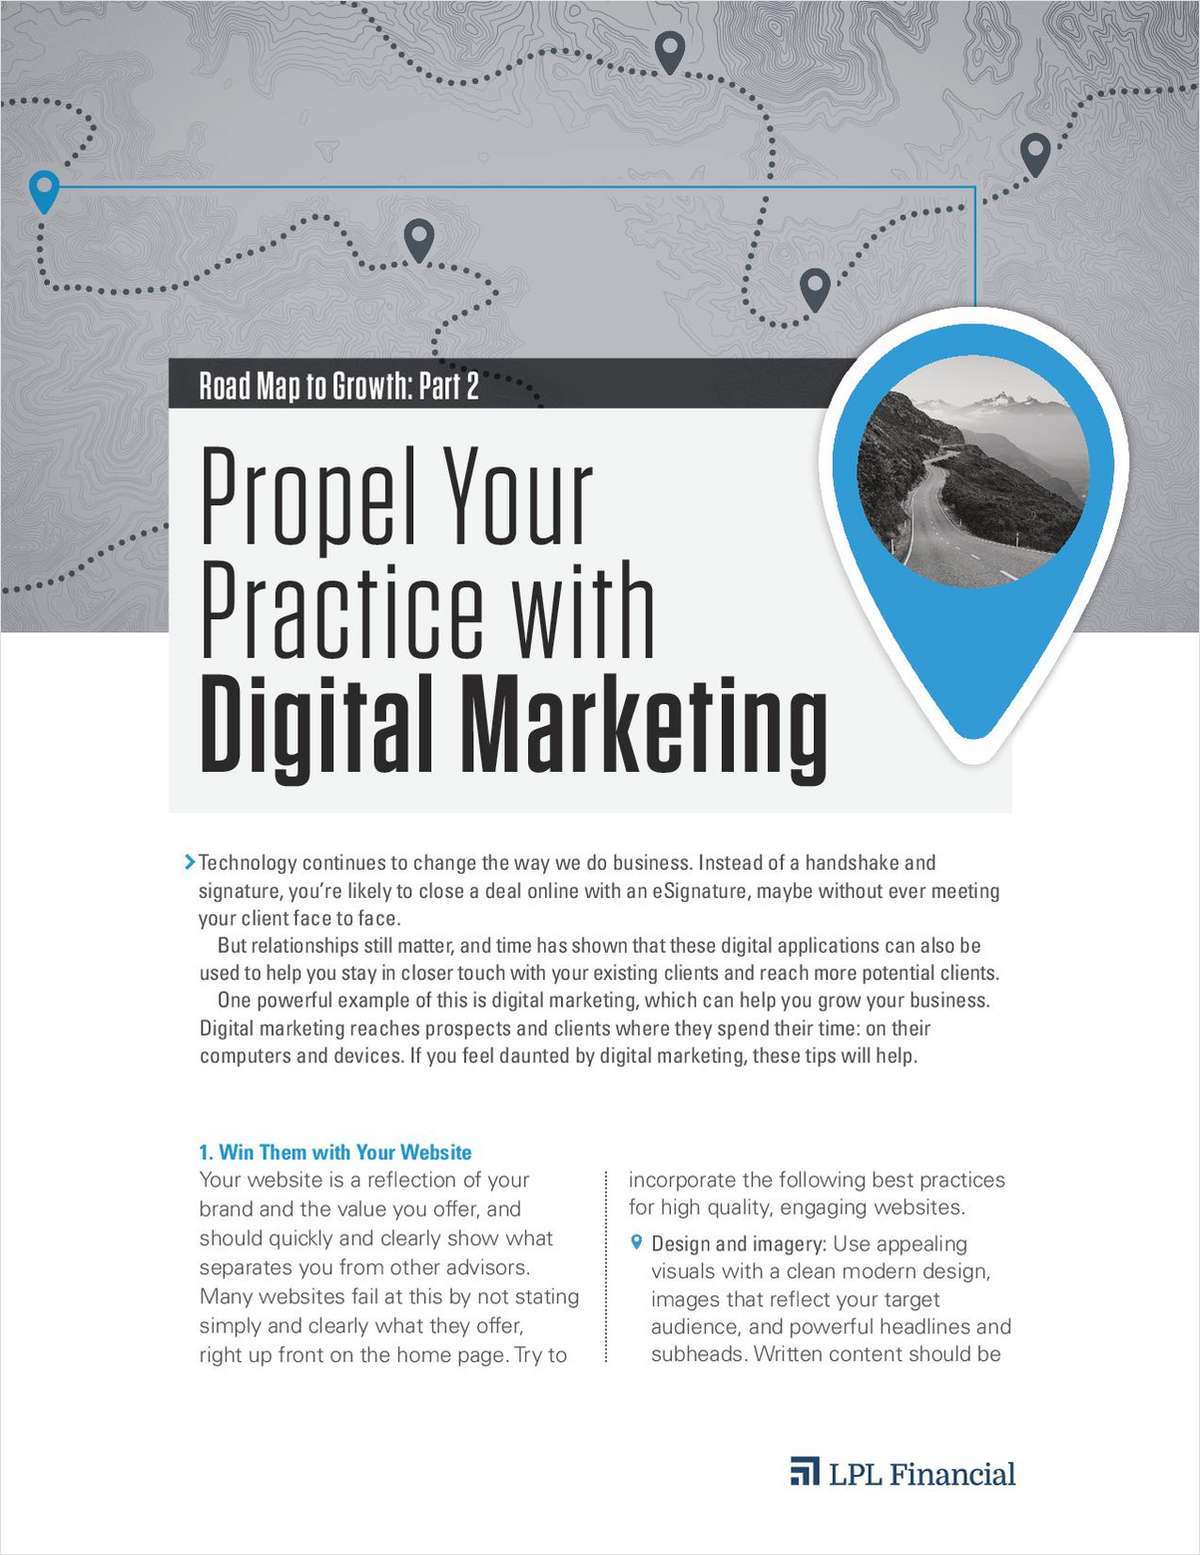 Propel Your Practice with Digital Marketing